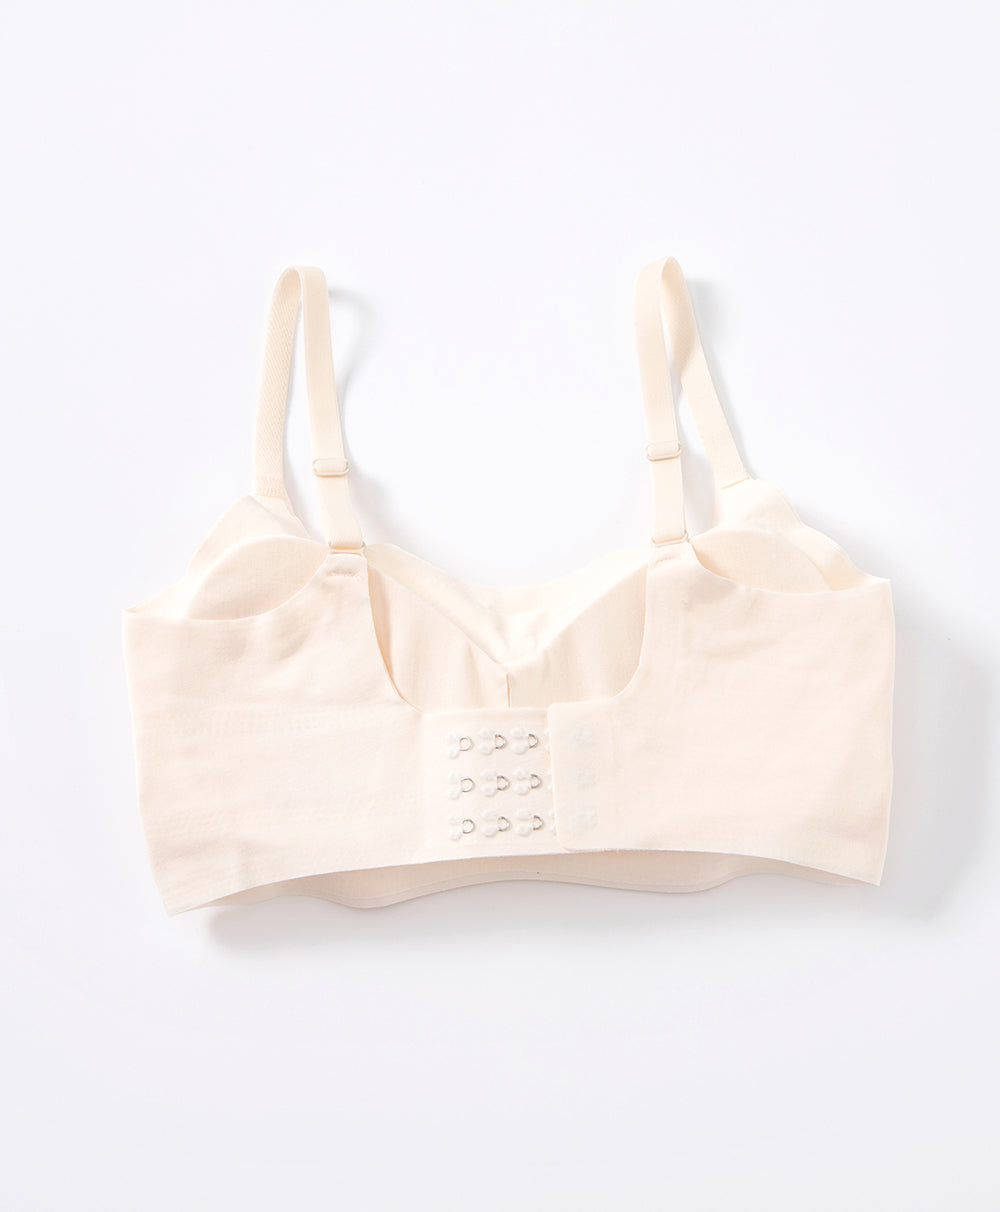 Young Hearts - NEW IN! Non-Slip Strapless Wireless Bra $24.90 each  Available in Beige & Black #NorthPoint #NEX #AMKHub #BedokMall #JEM  #ClementiMall #CompassOne #CenturySquare #SuntecCity #WaterwayPoint